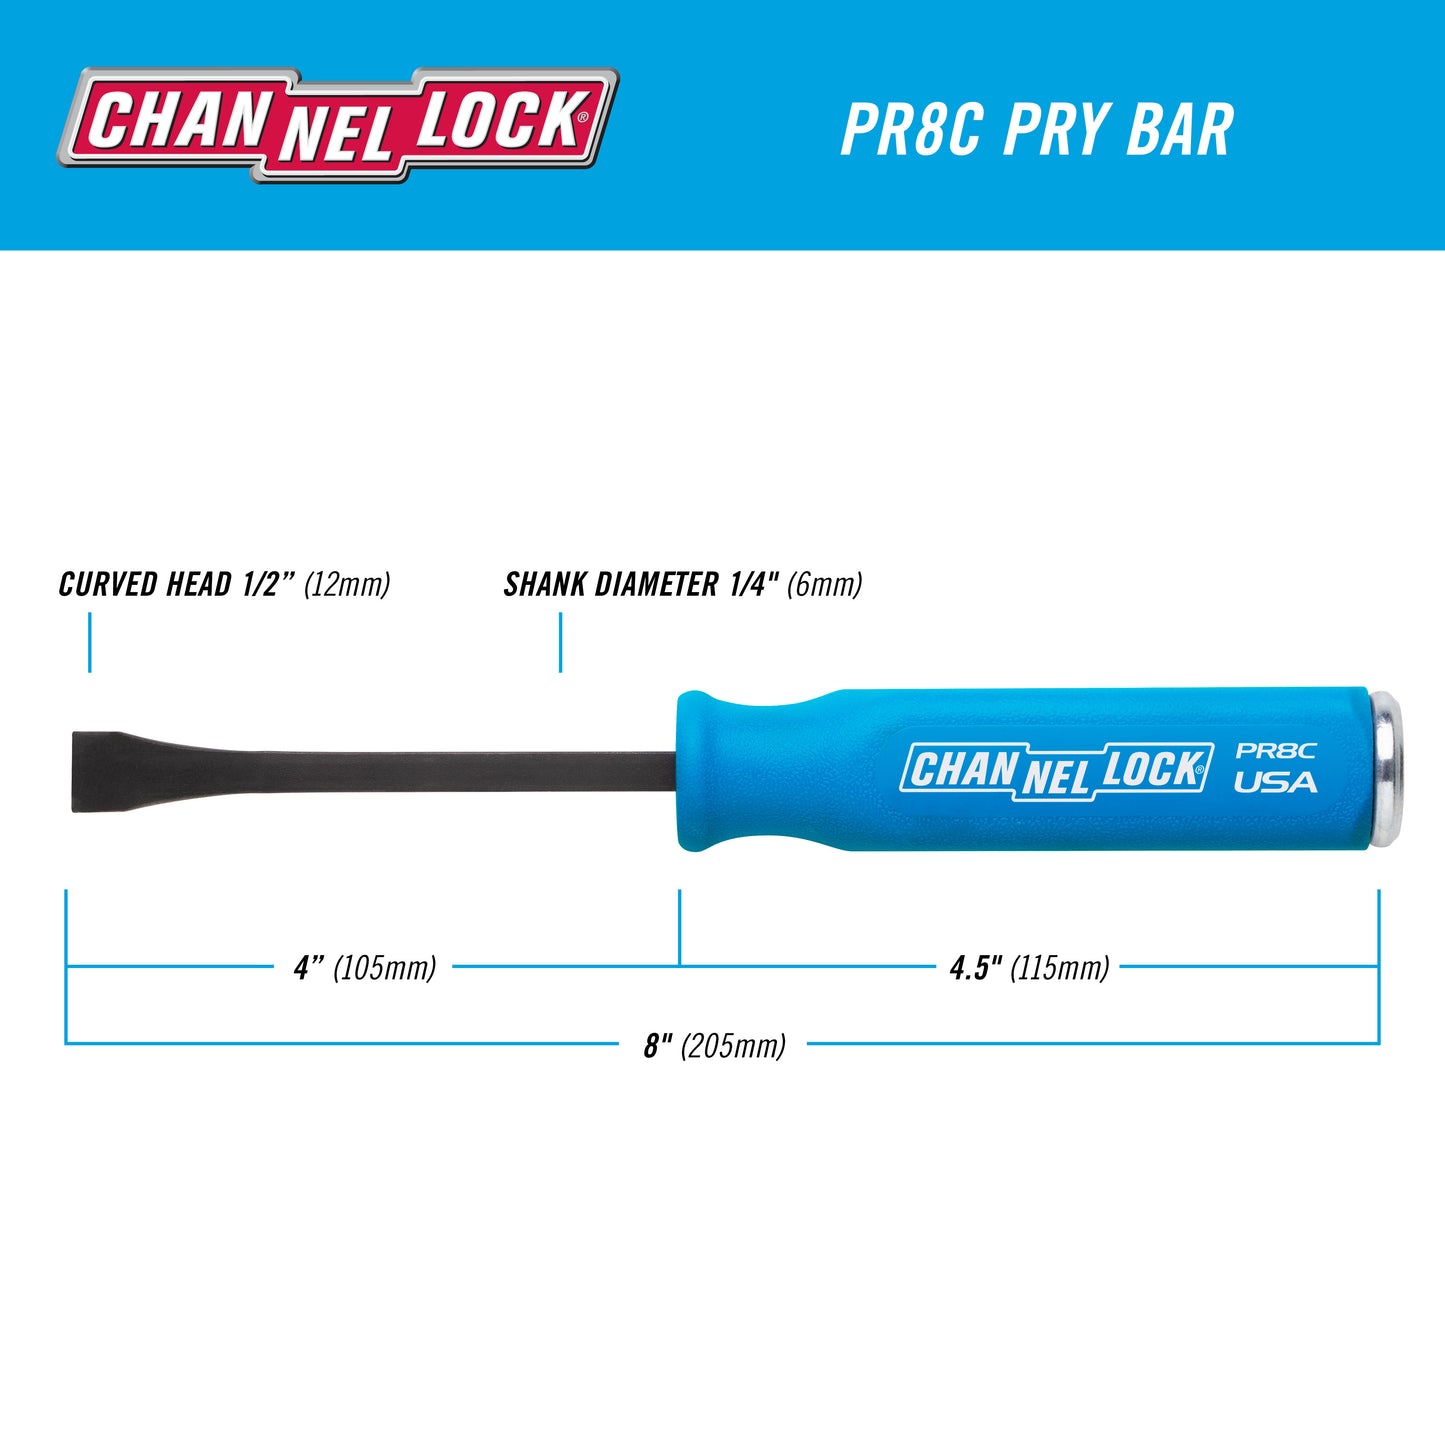 PR8C 1/2 x 4-inch Professional Pry Bar, 8-inch Overall Length